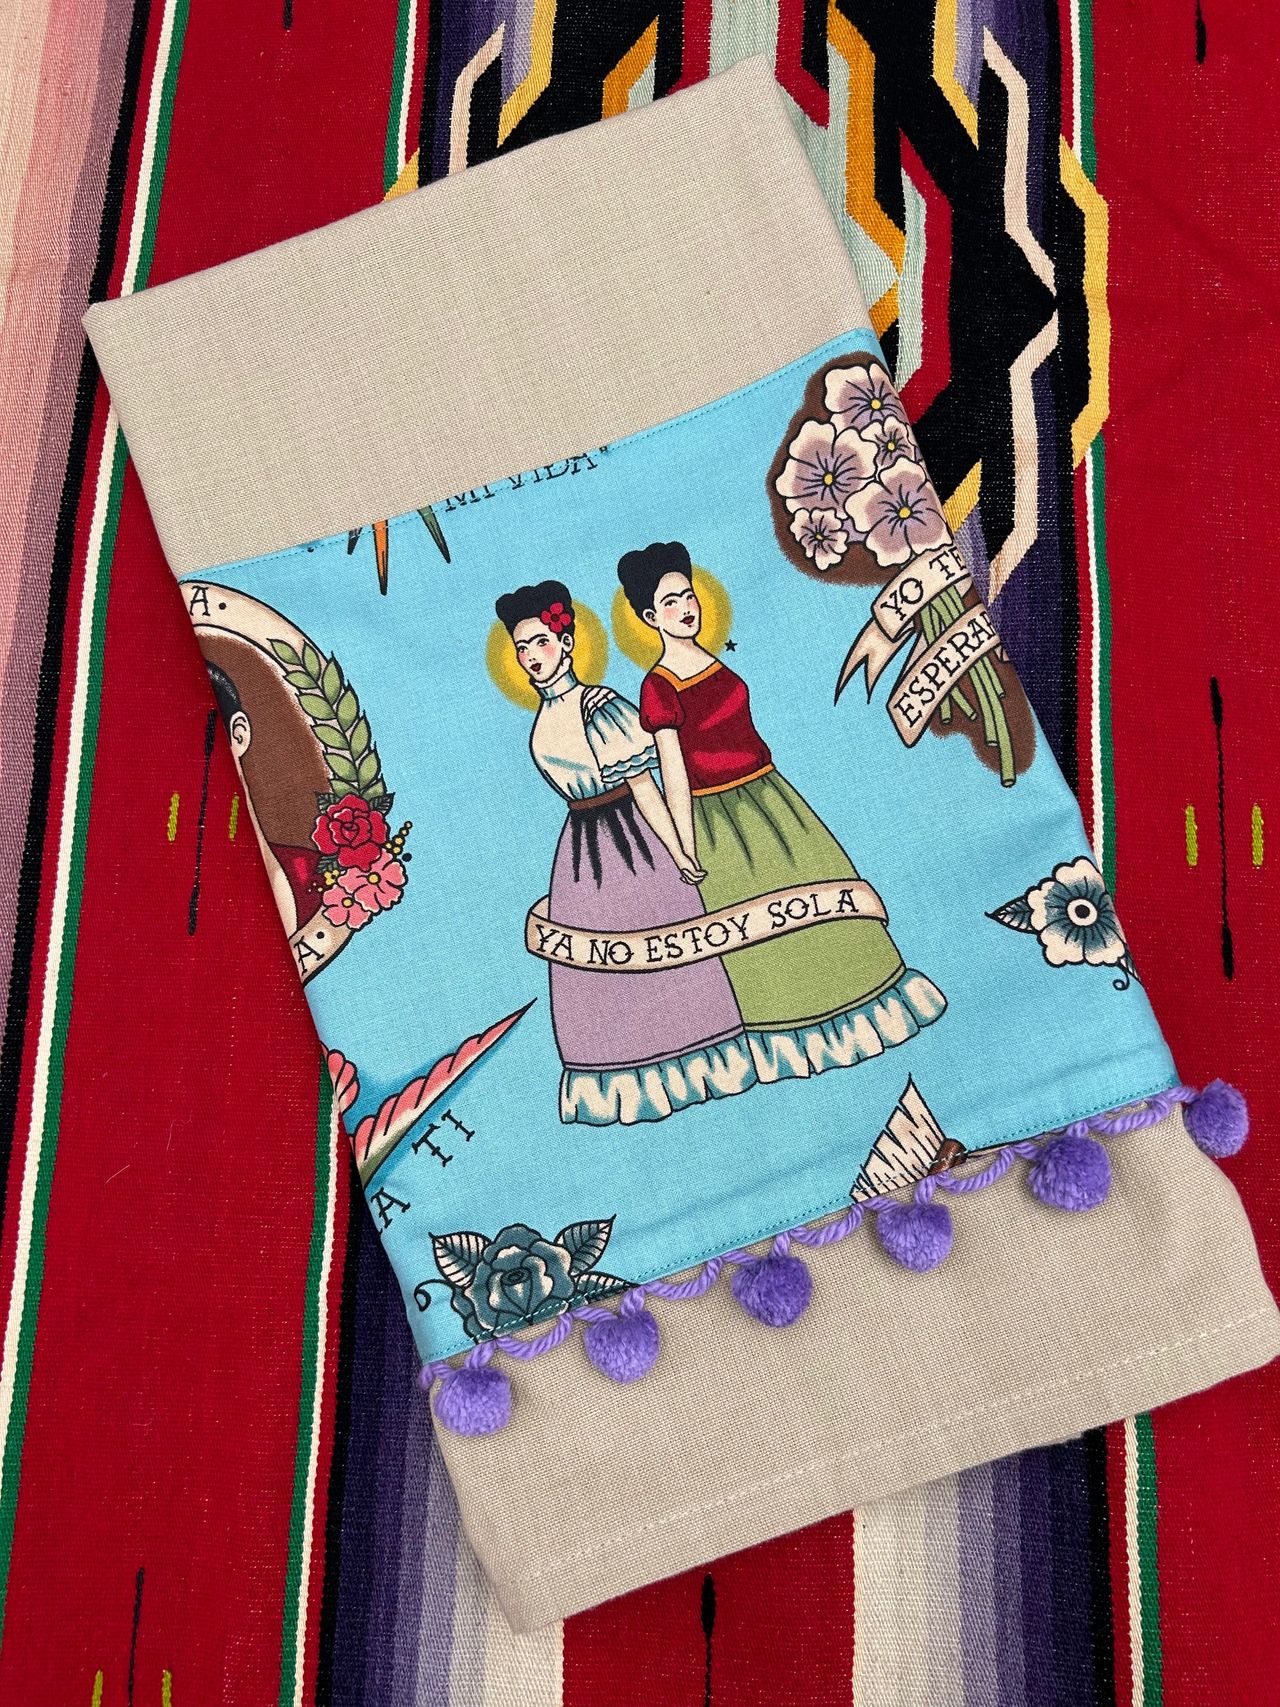 You can find more Frida Kahlo, Day of the Dead and Halloween tea towels in my Etsy shop.